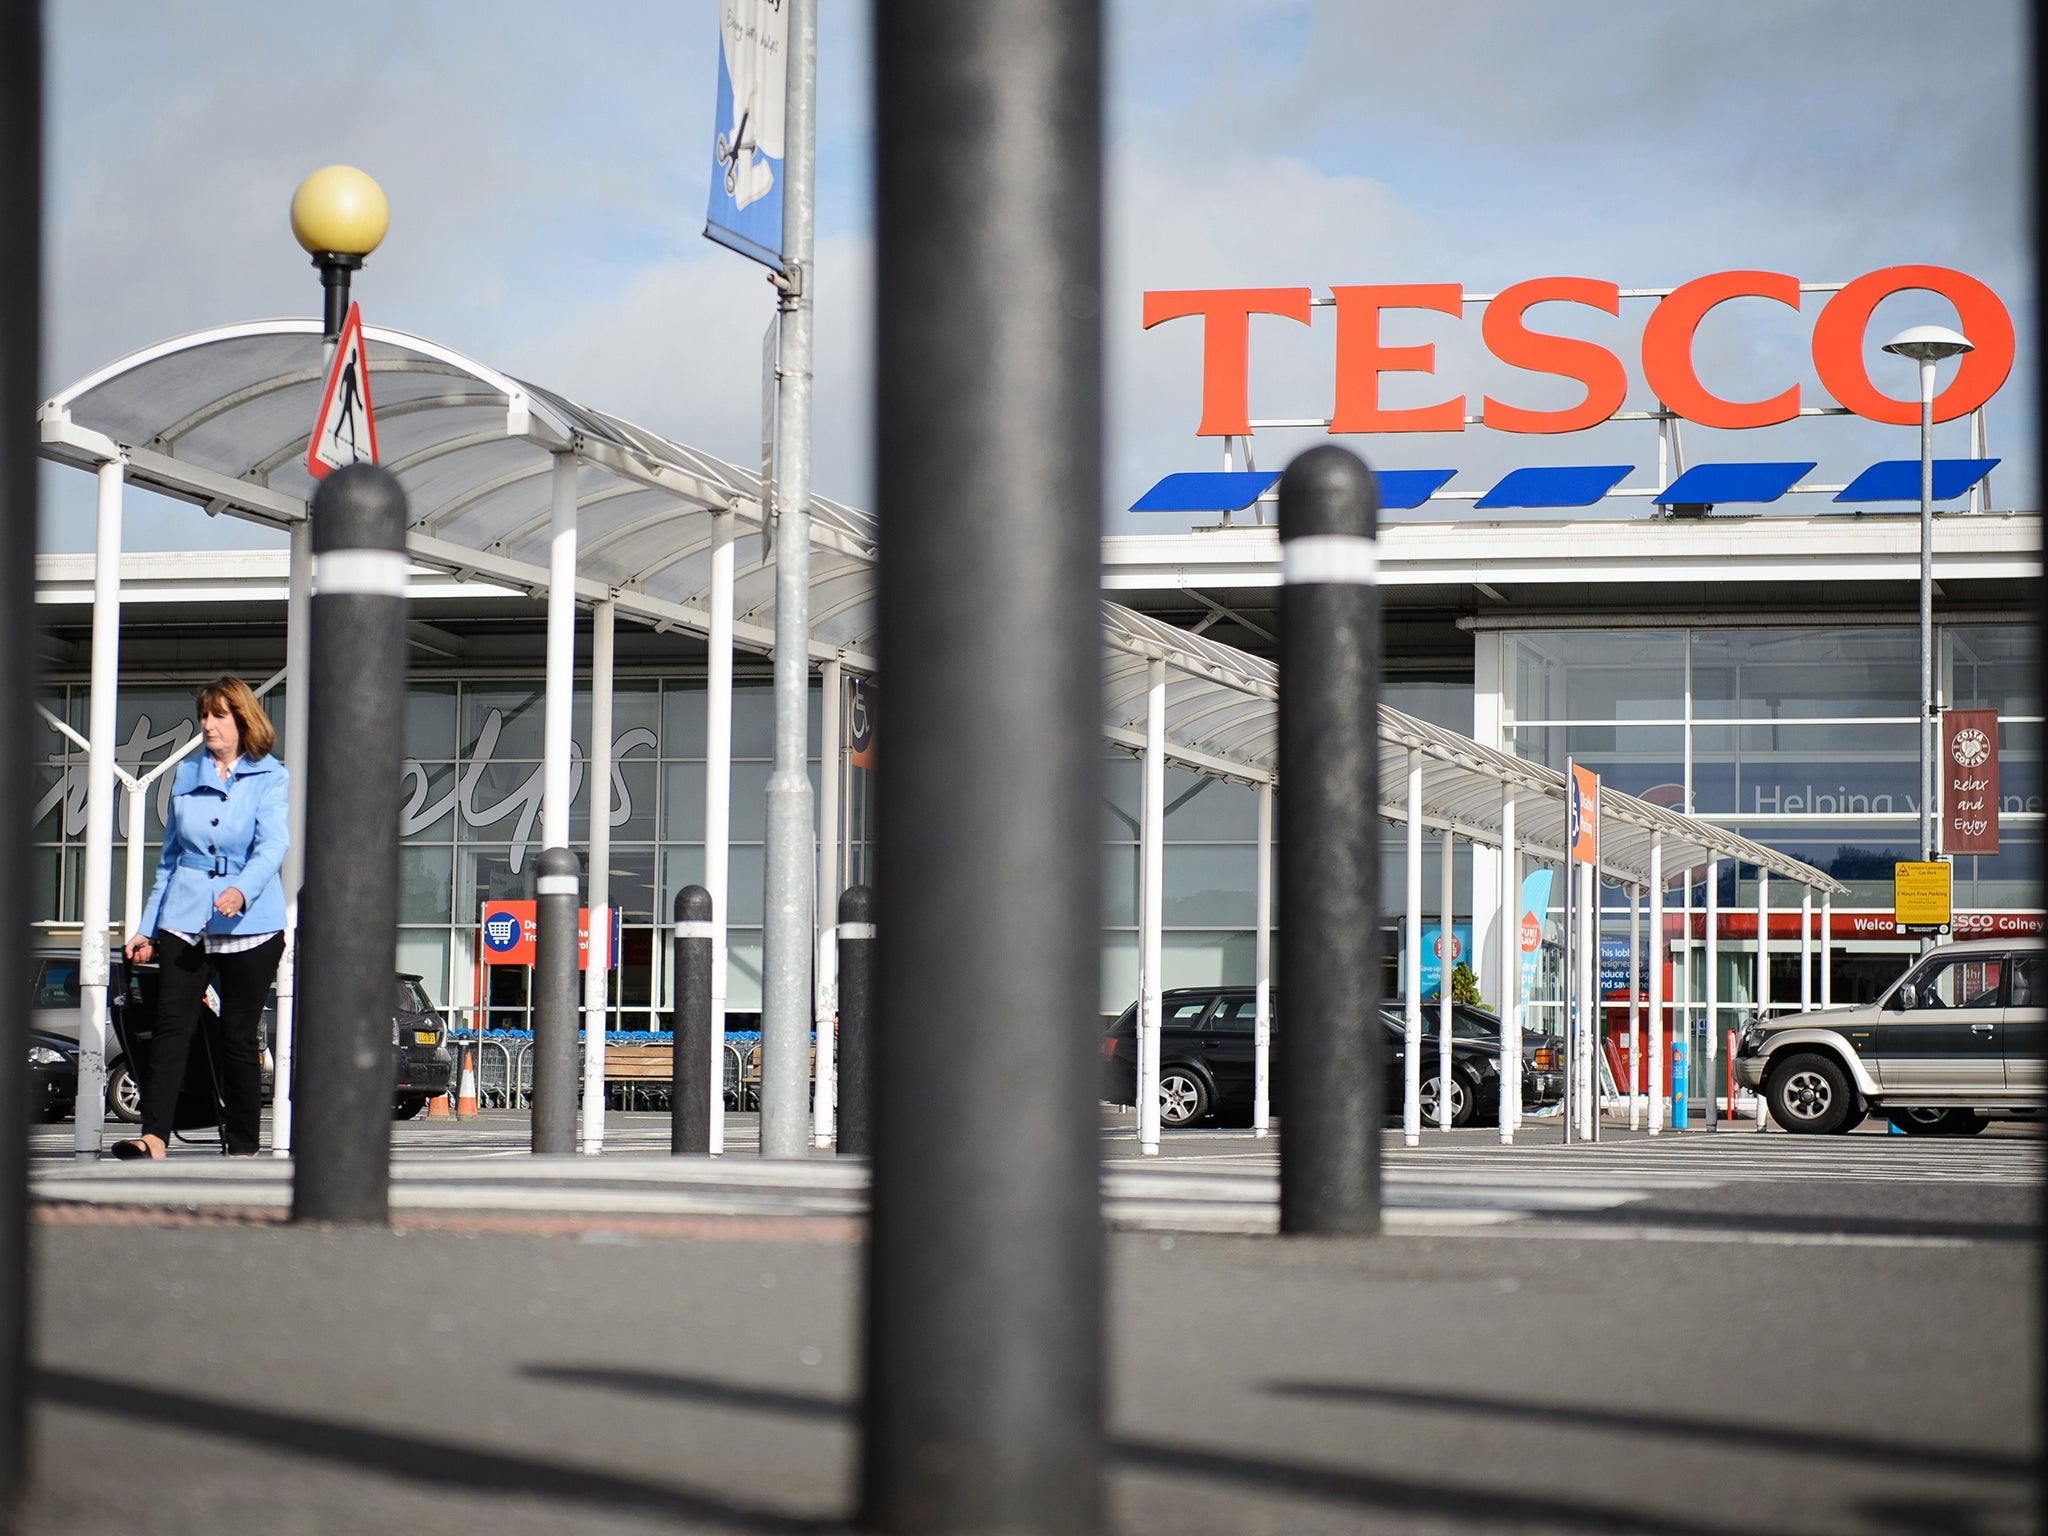 Tesco’s £250m profit shortfall is being investigated by Deloitte